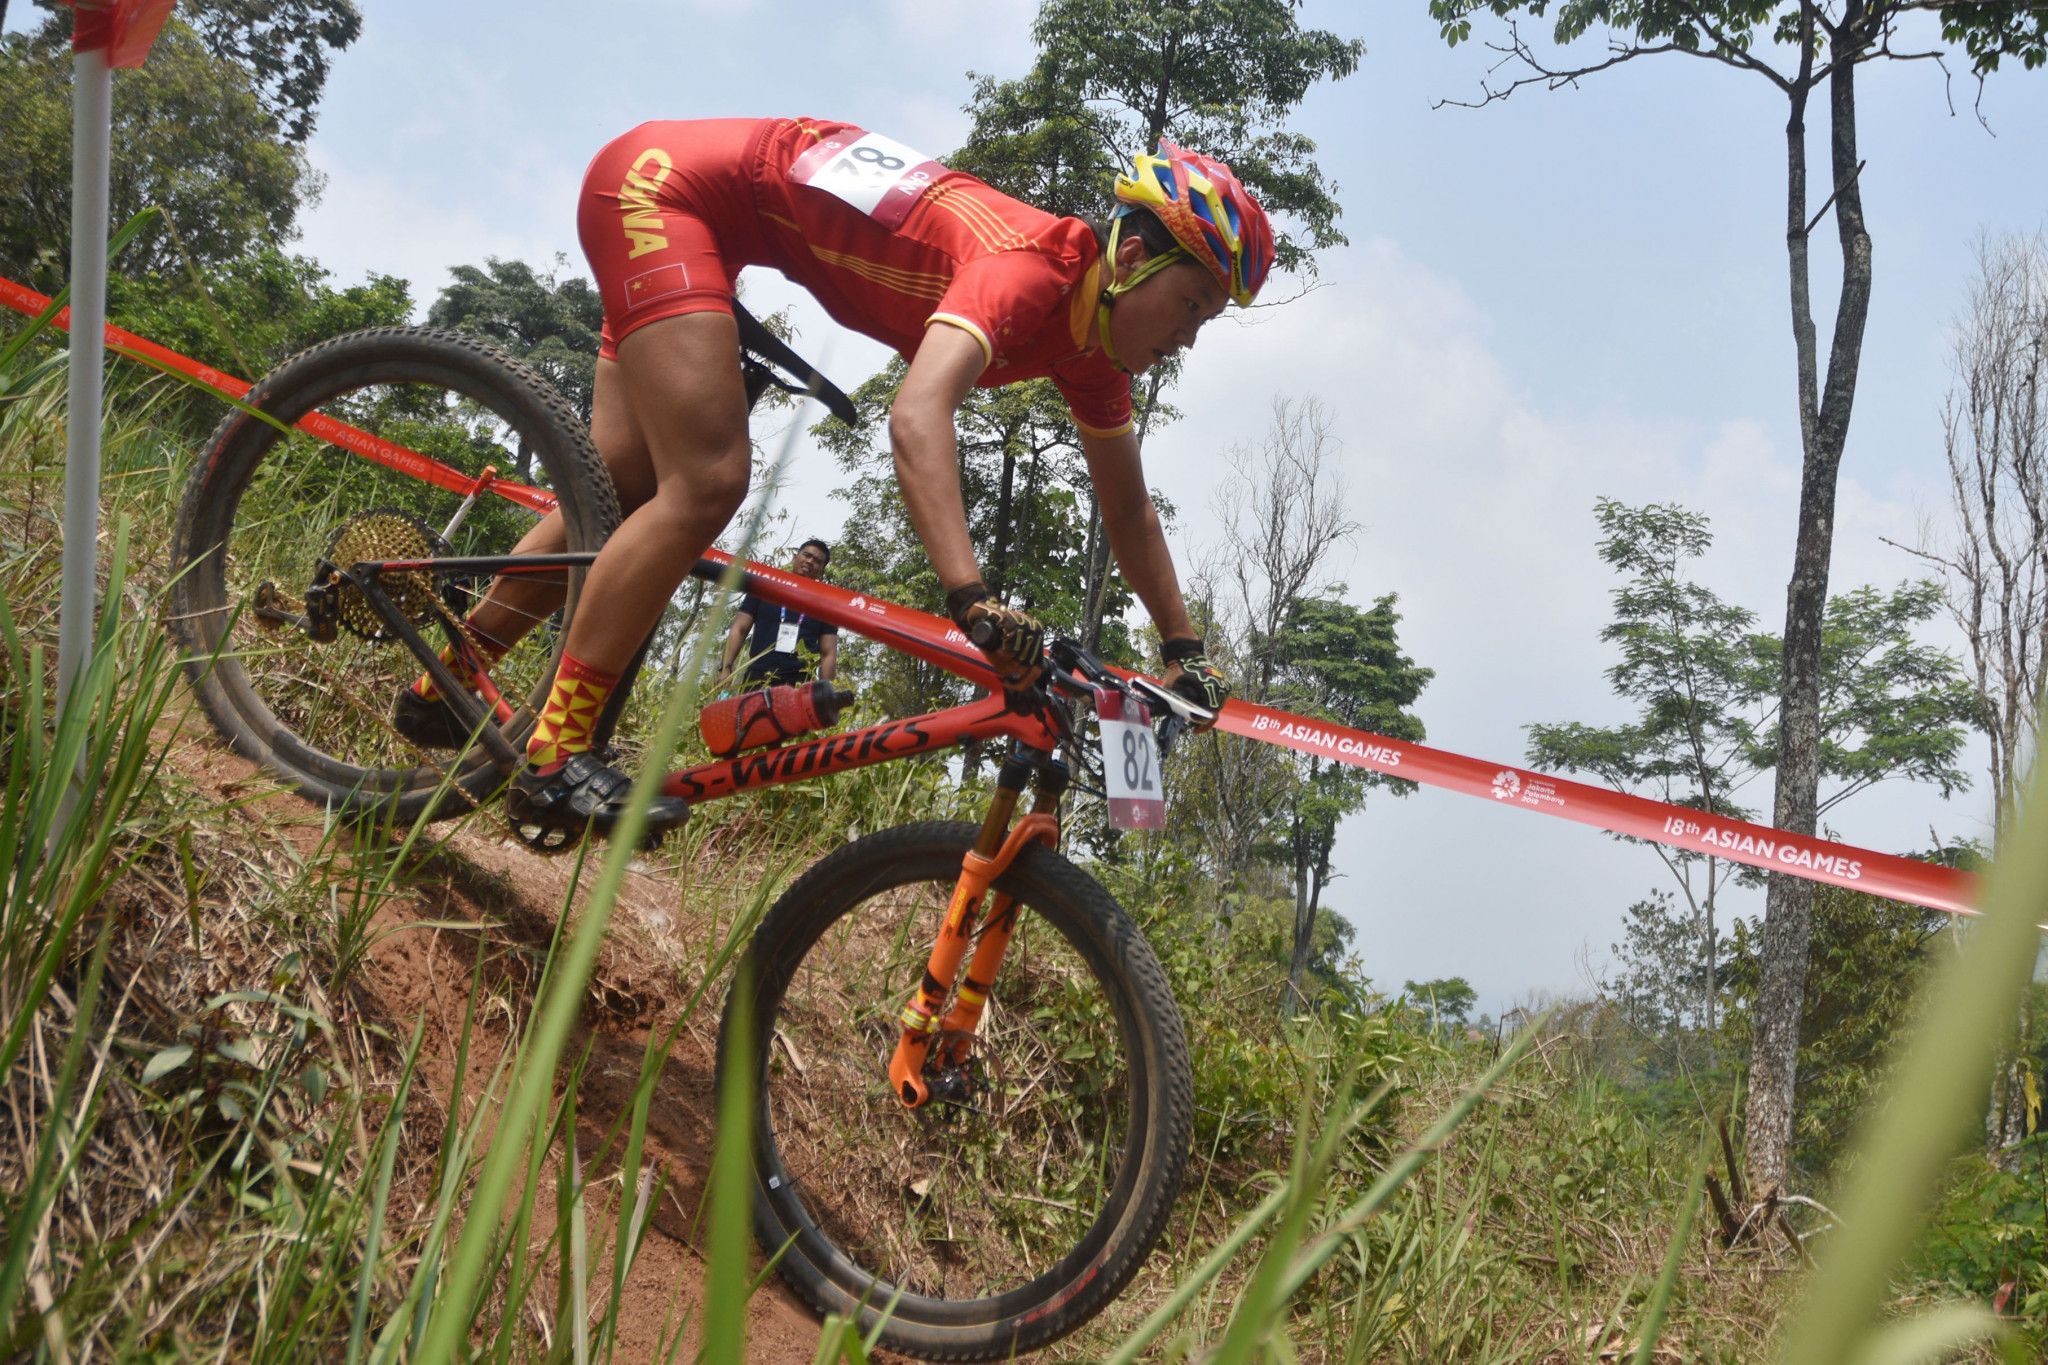 China's Bianwa Yao won the women's mountain bike cross country event, while her compatriot Hao Ma won the men's ©Getty Images